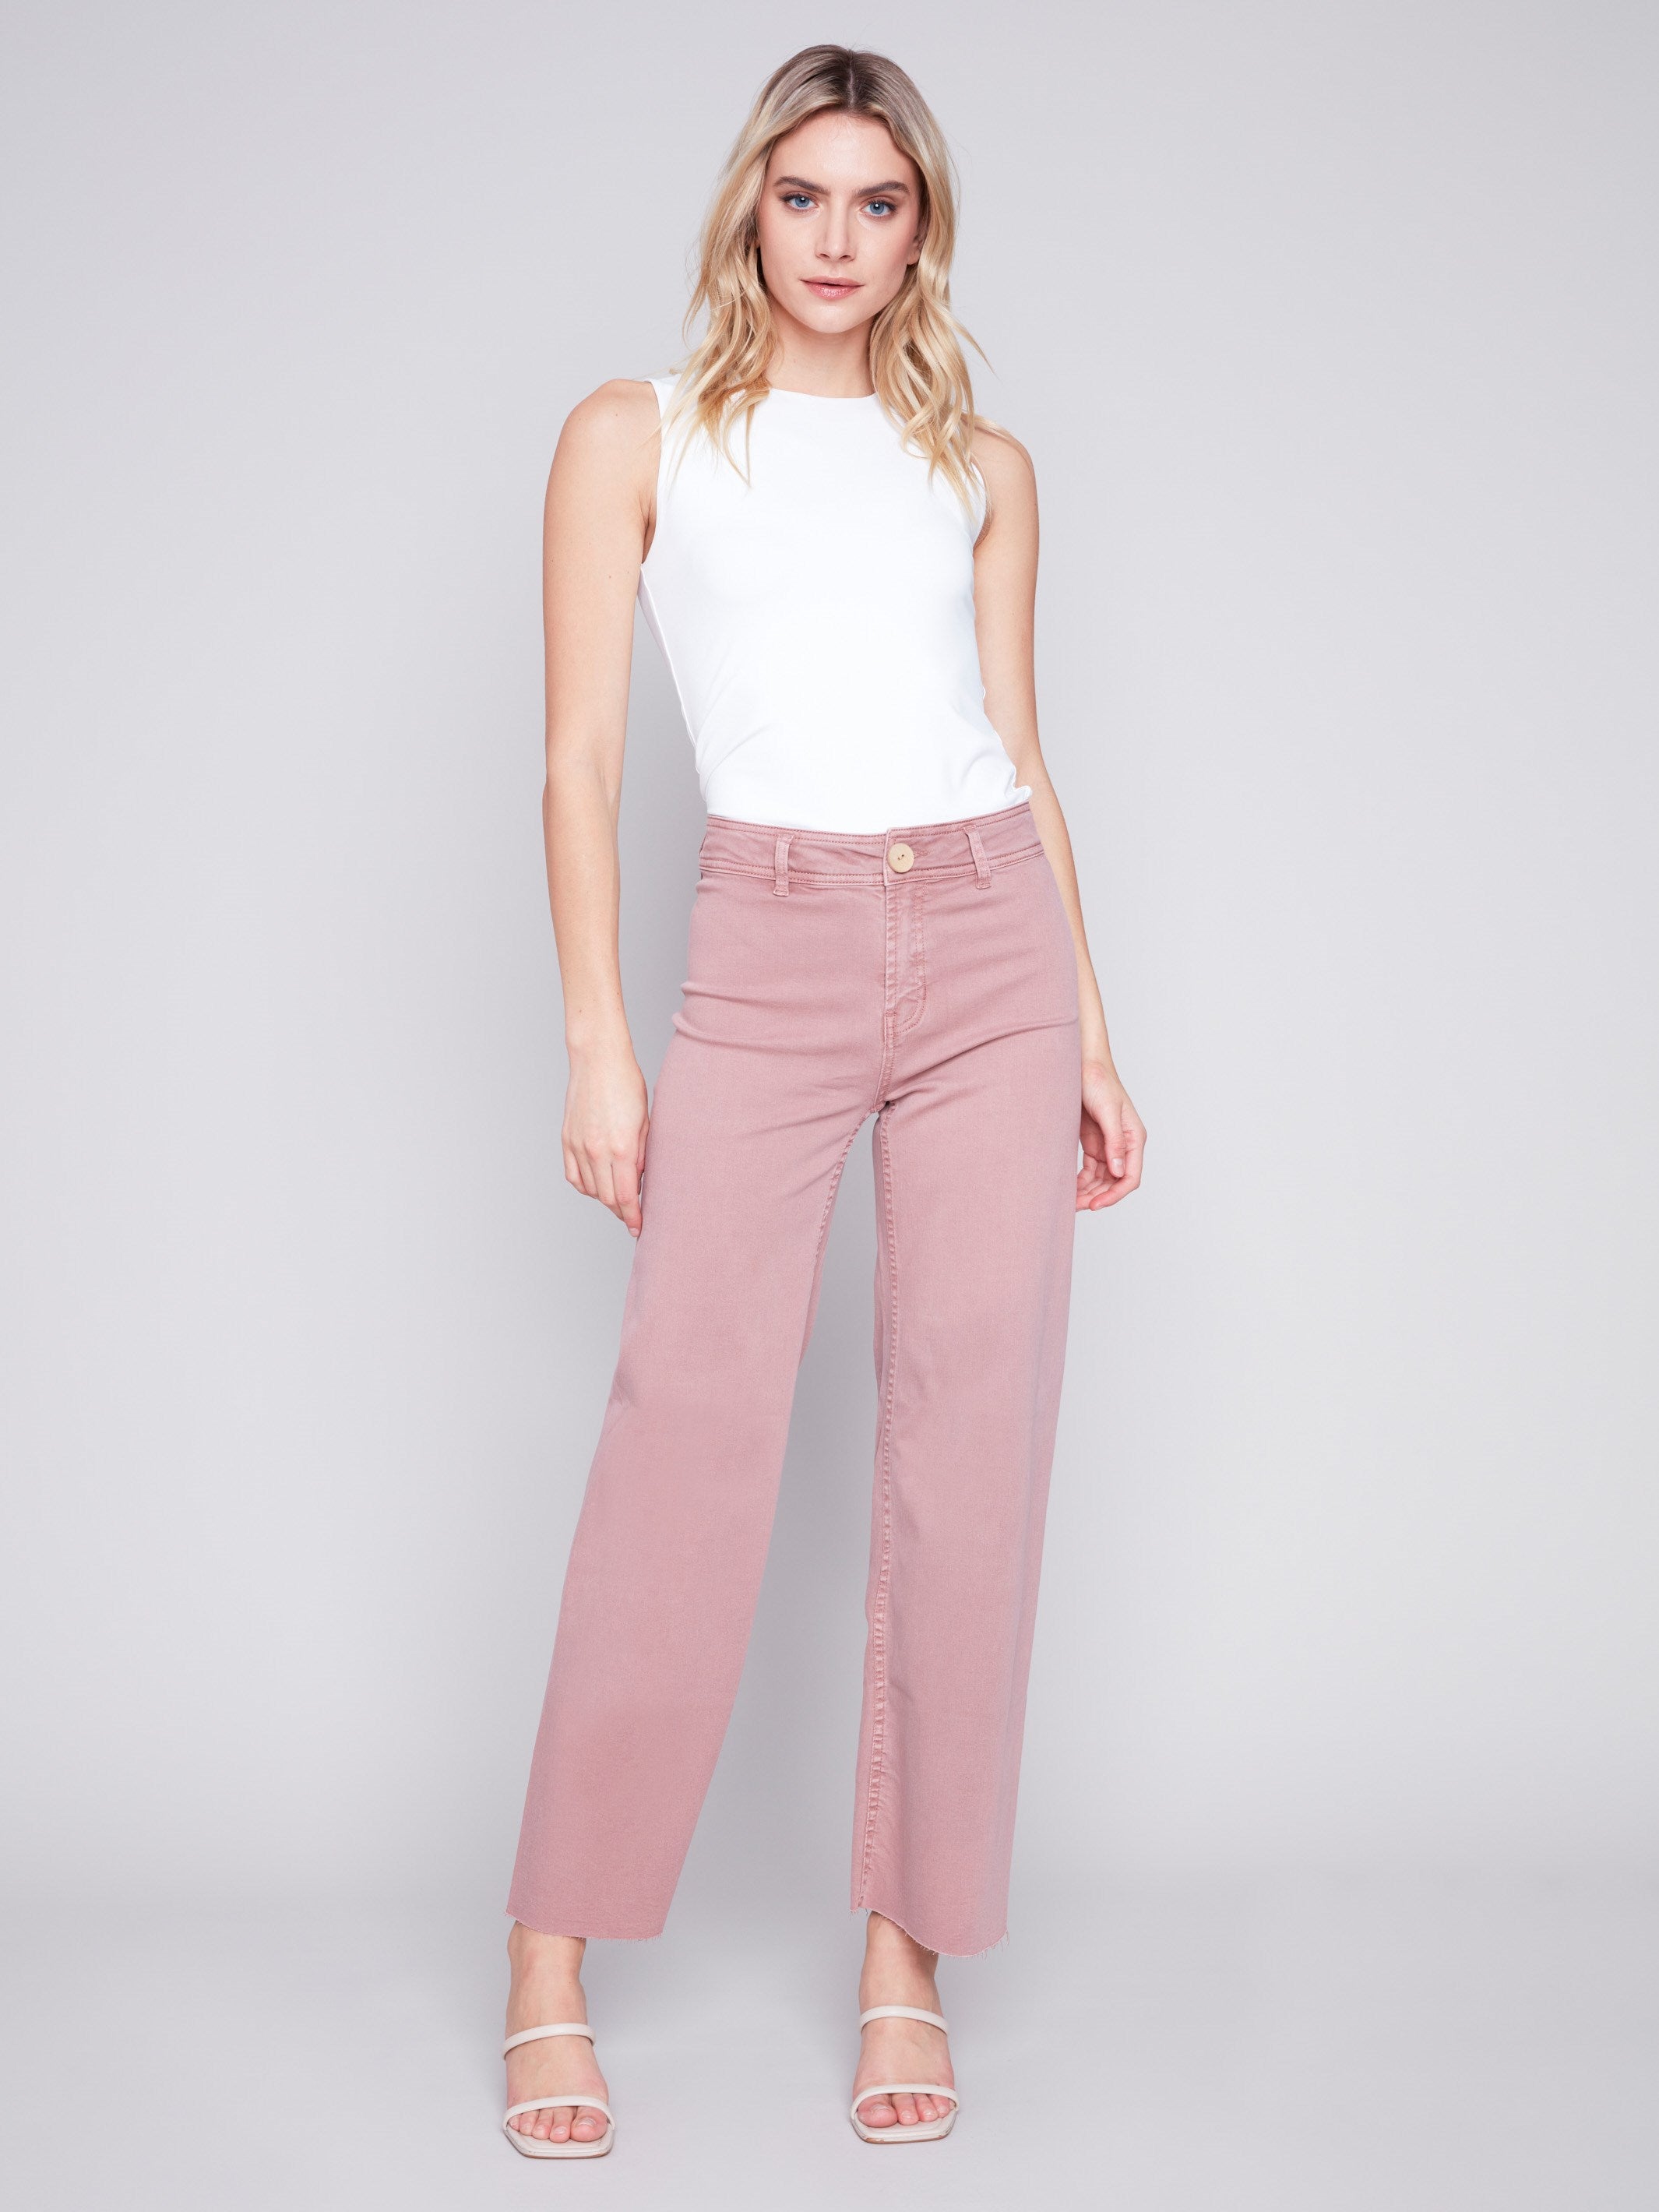 Wide Leg Twill Jeans with Raw Hem - Woodrose - Charlie B Collection Canada - Image 1